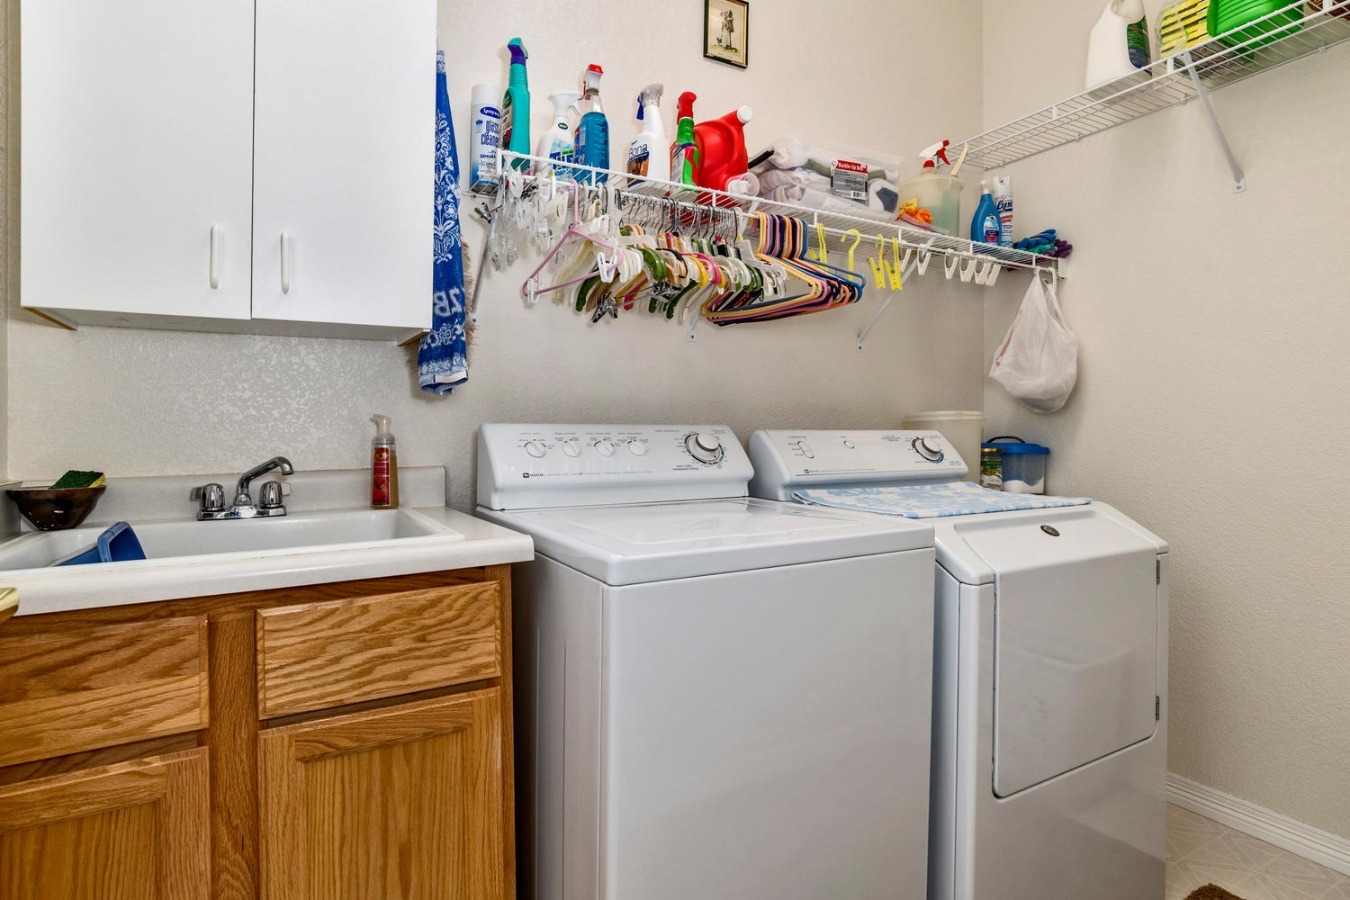 Main Floor Laundry Room with Utility Sink